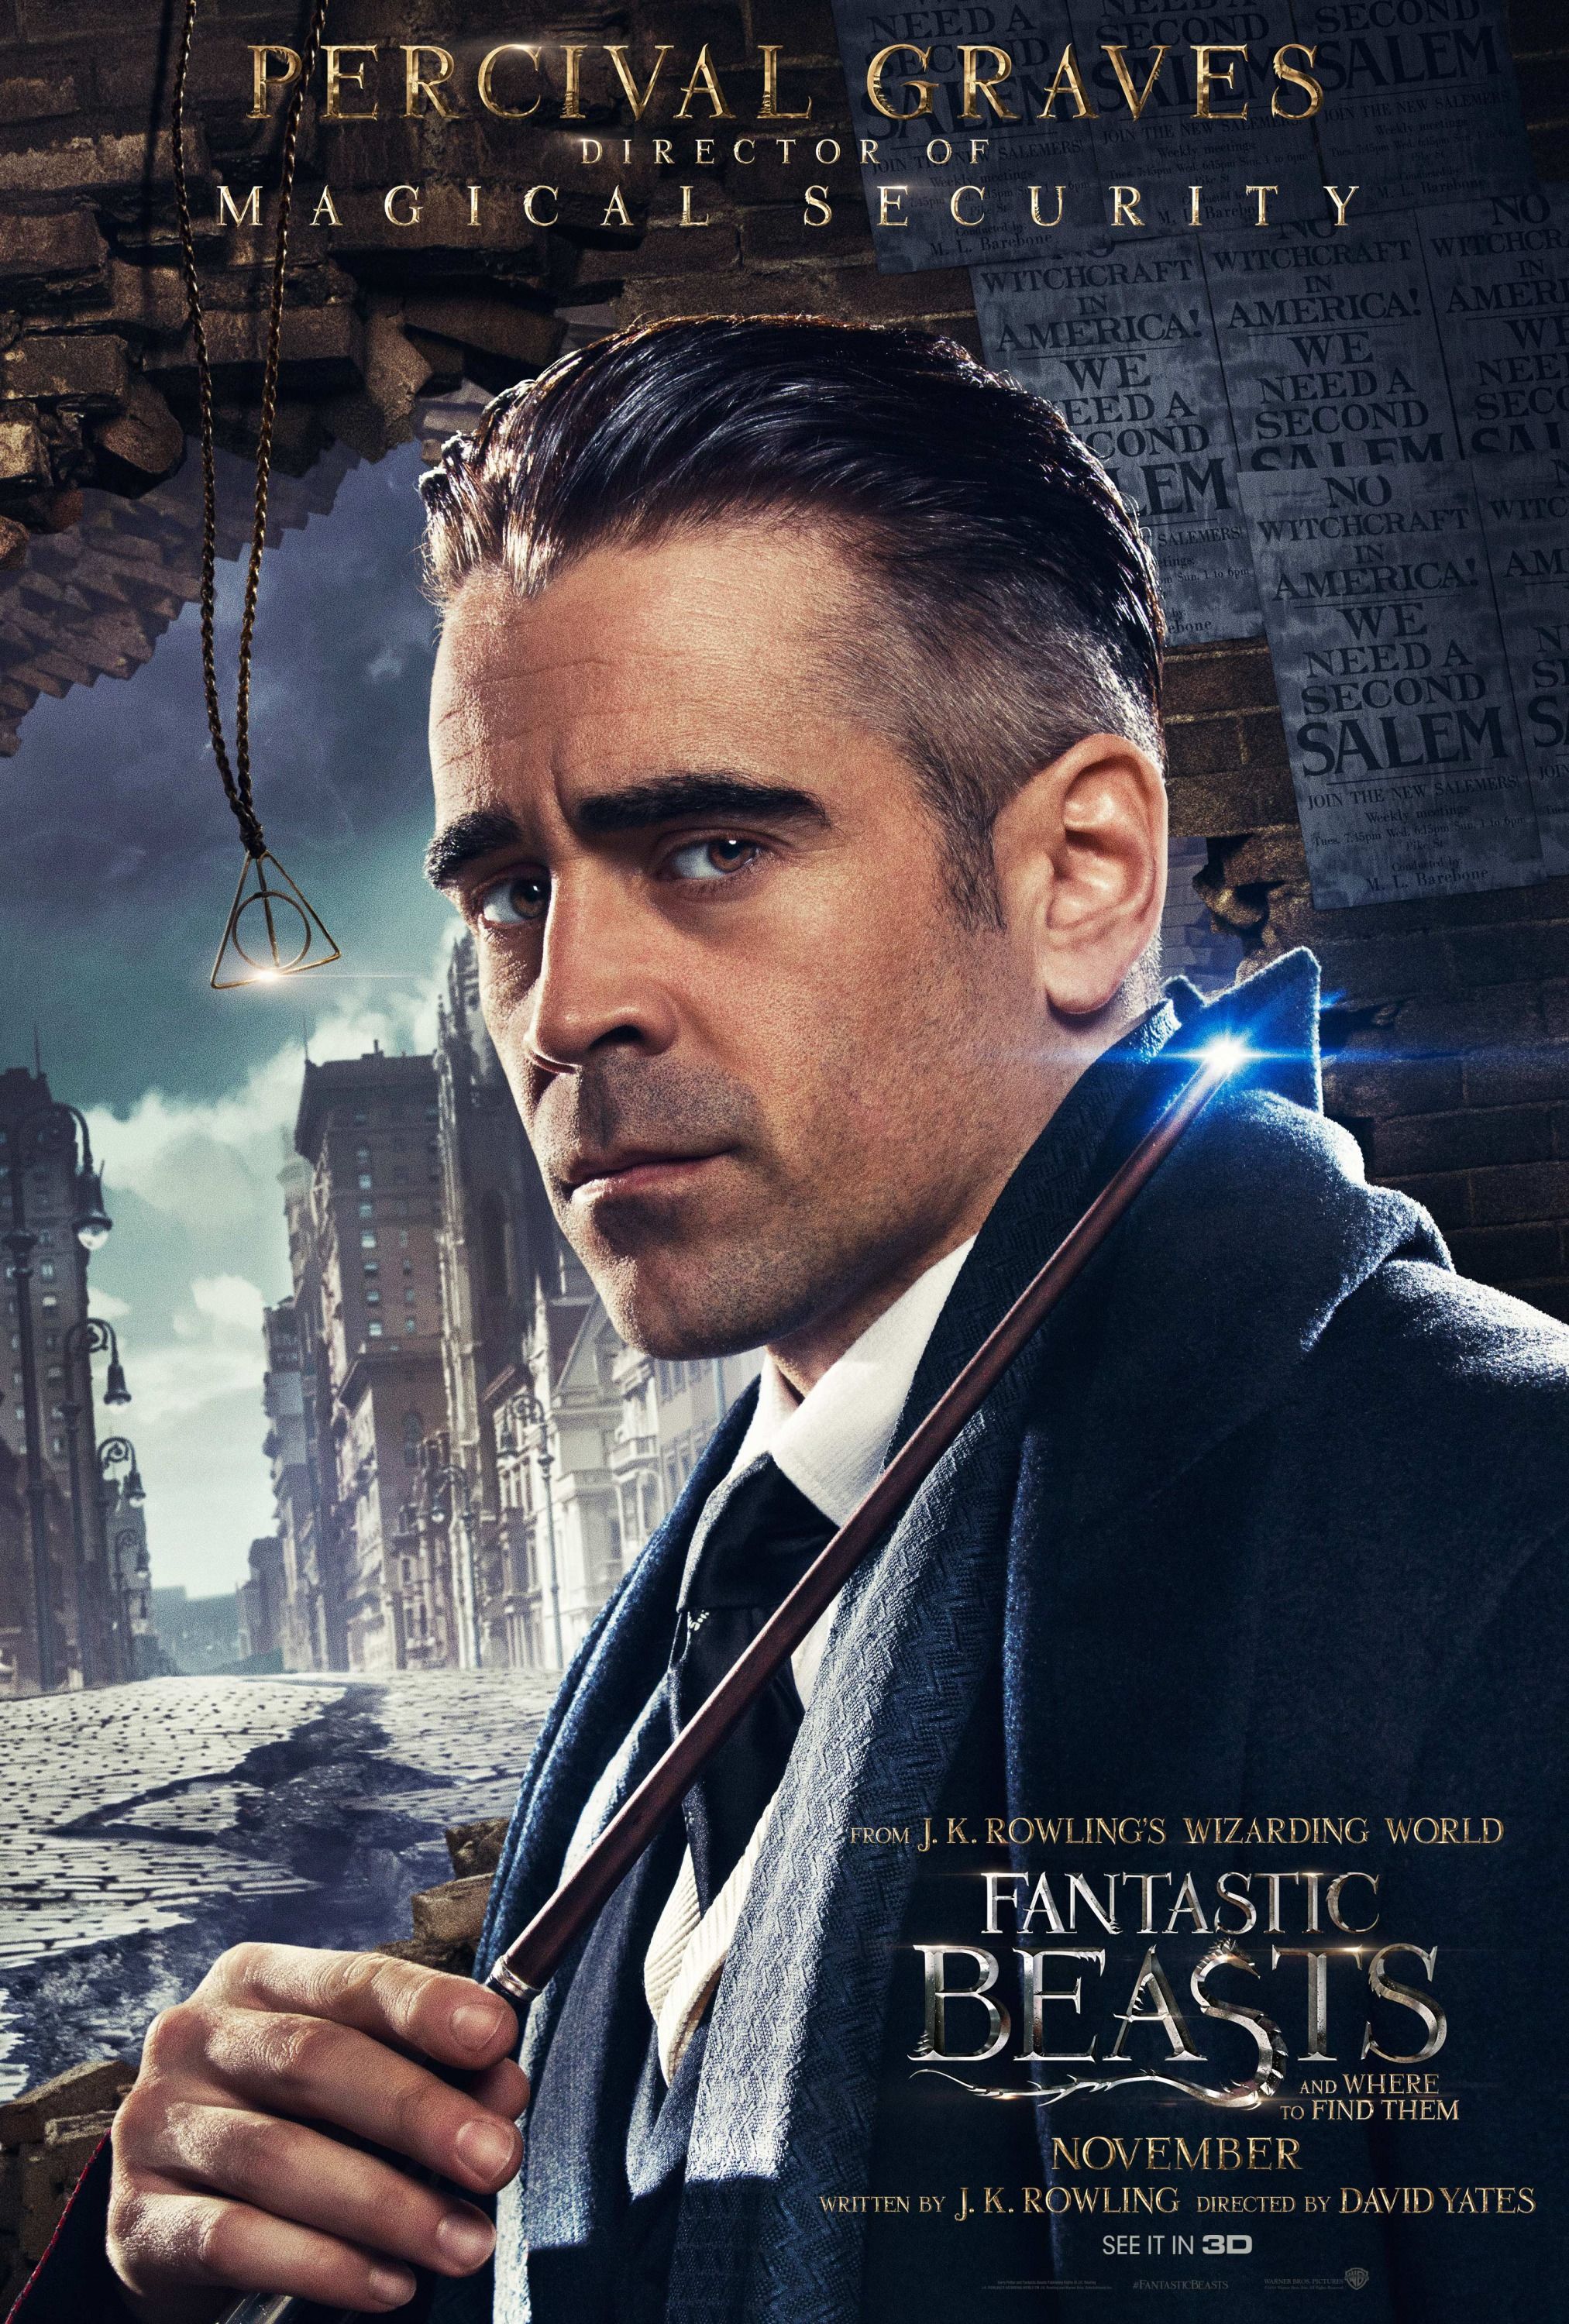 Fantastic Beasts Character Posters 6